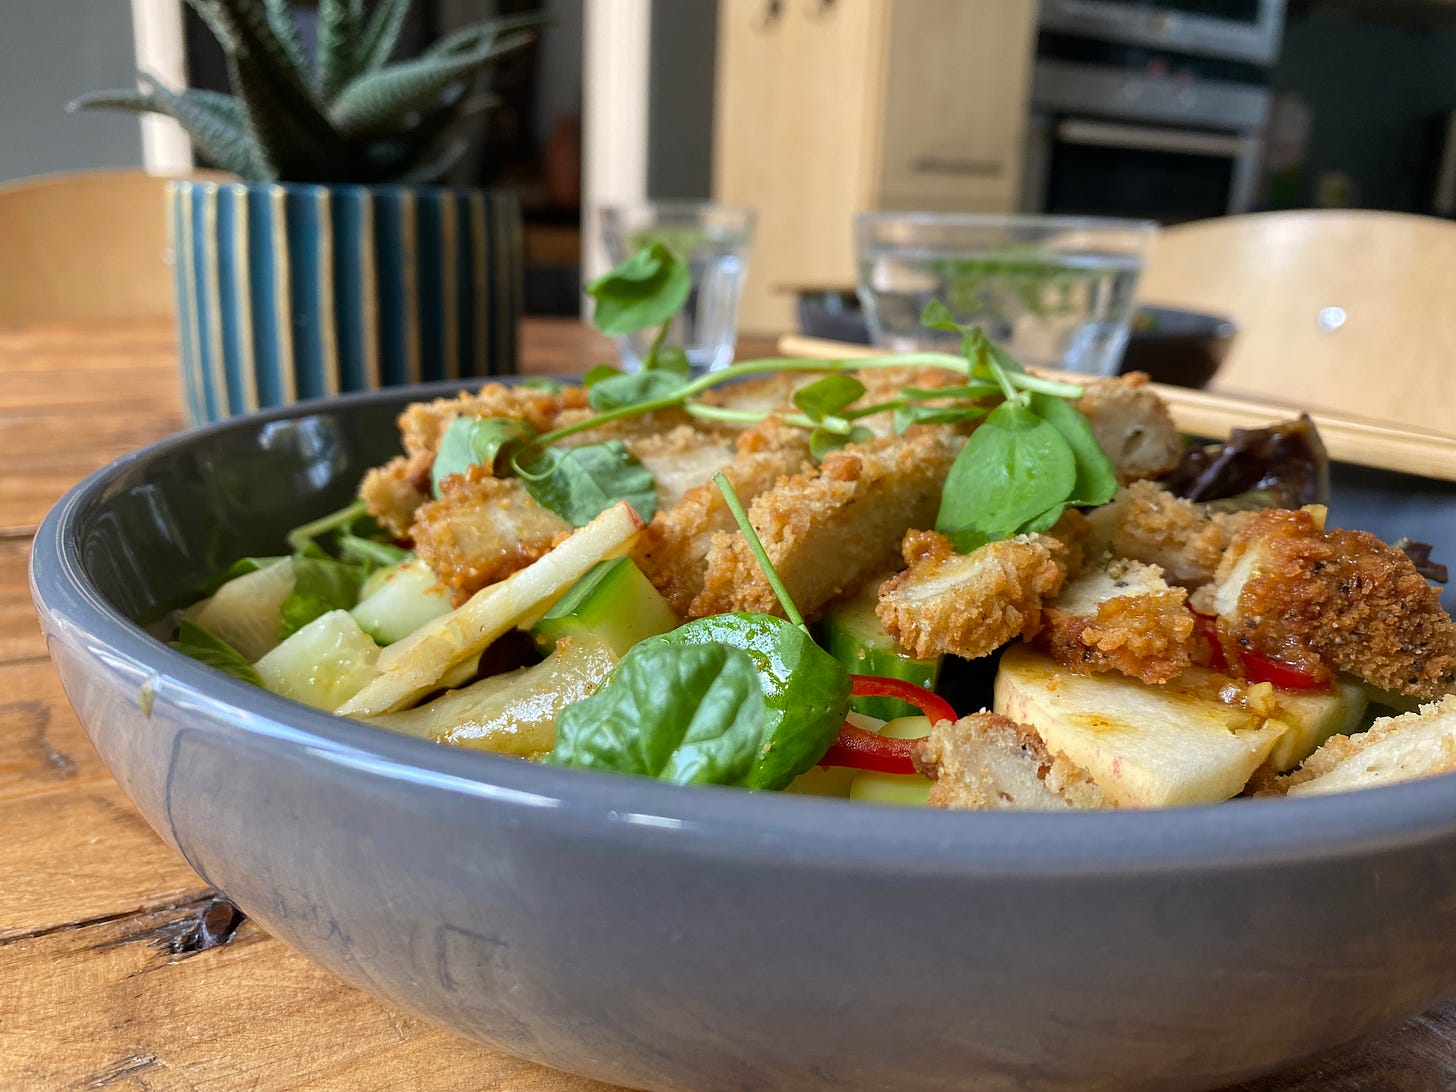 Bowl of salad with breaded chicken and pieces of spinach, apple and chilli